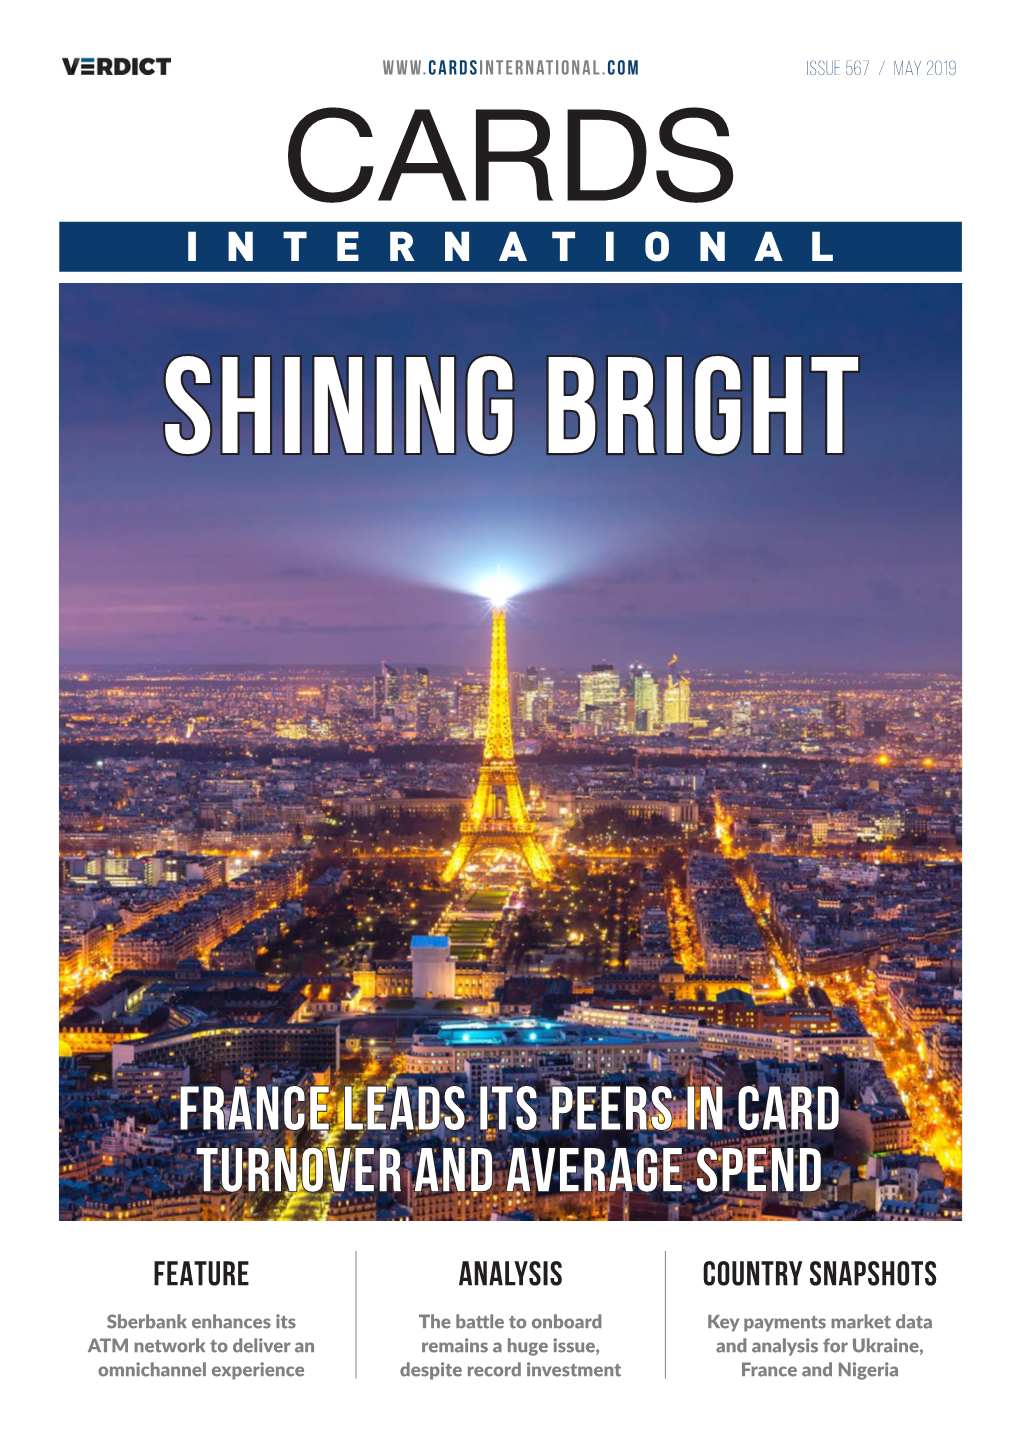 France Leads Its Peers in Card Turnover and Average Spend